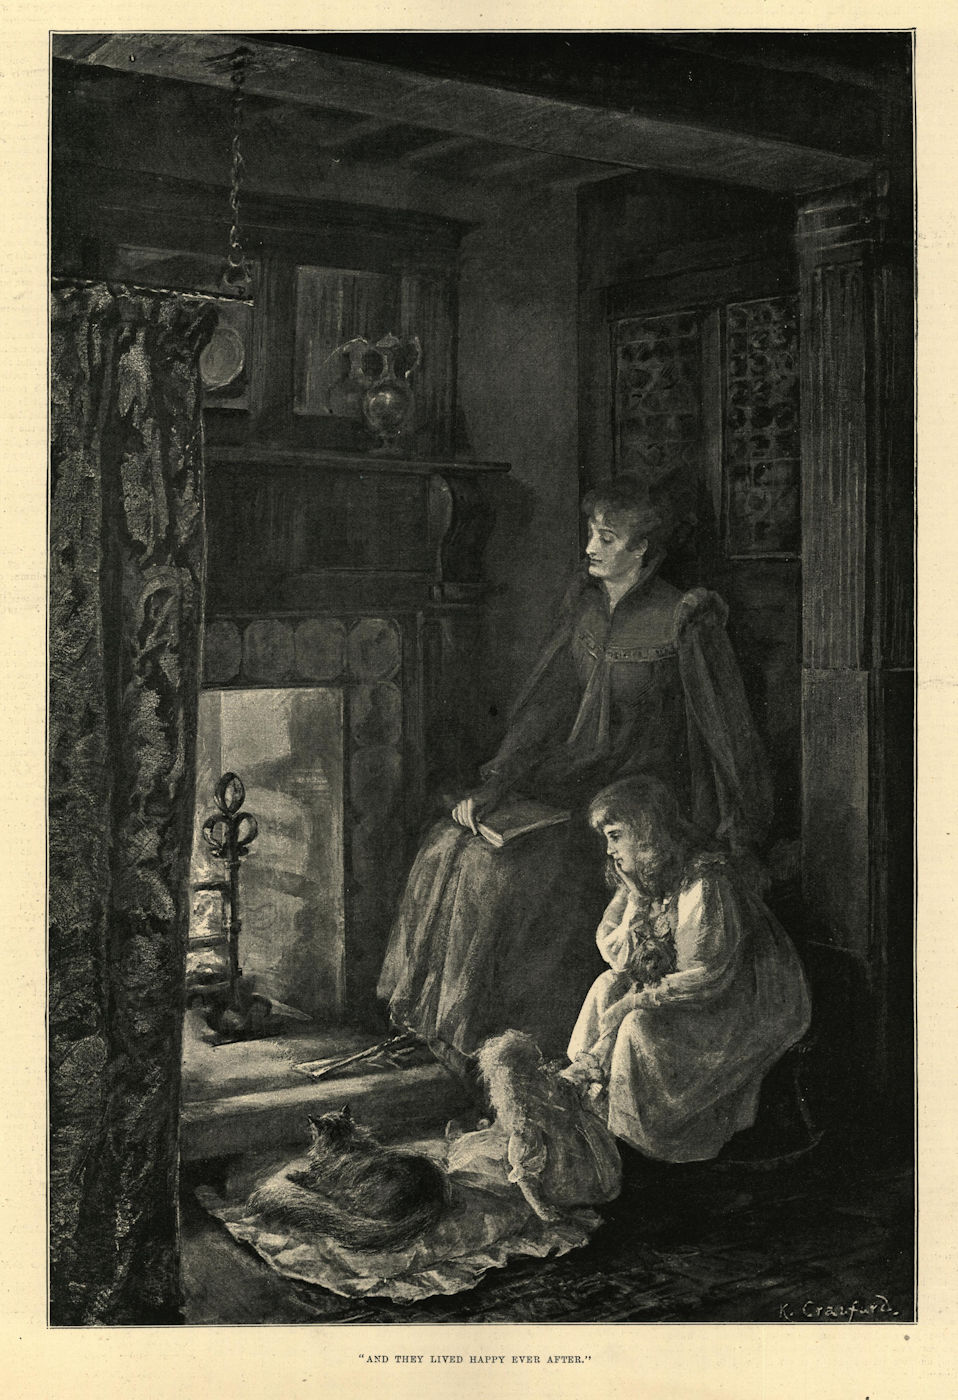 Associate Product "And they lived happily ever after". Family fireplace 1892 old antique print